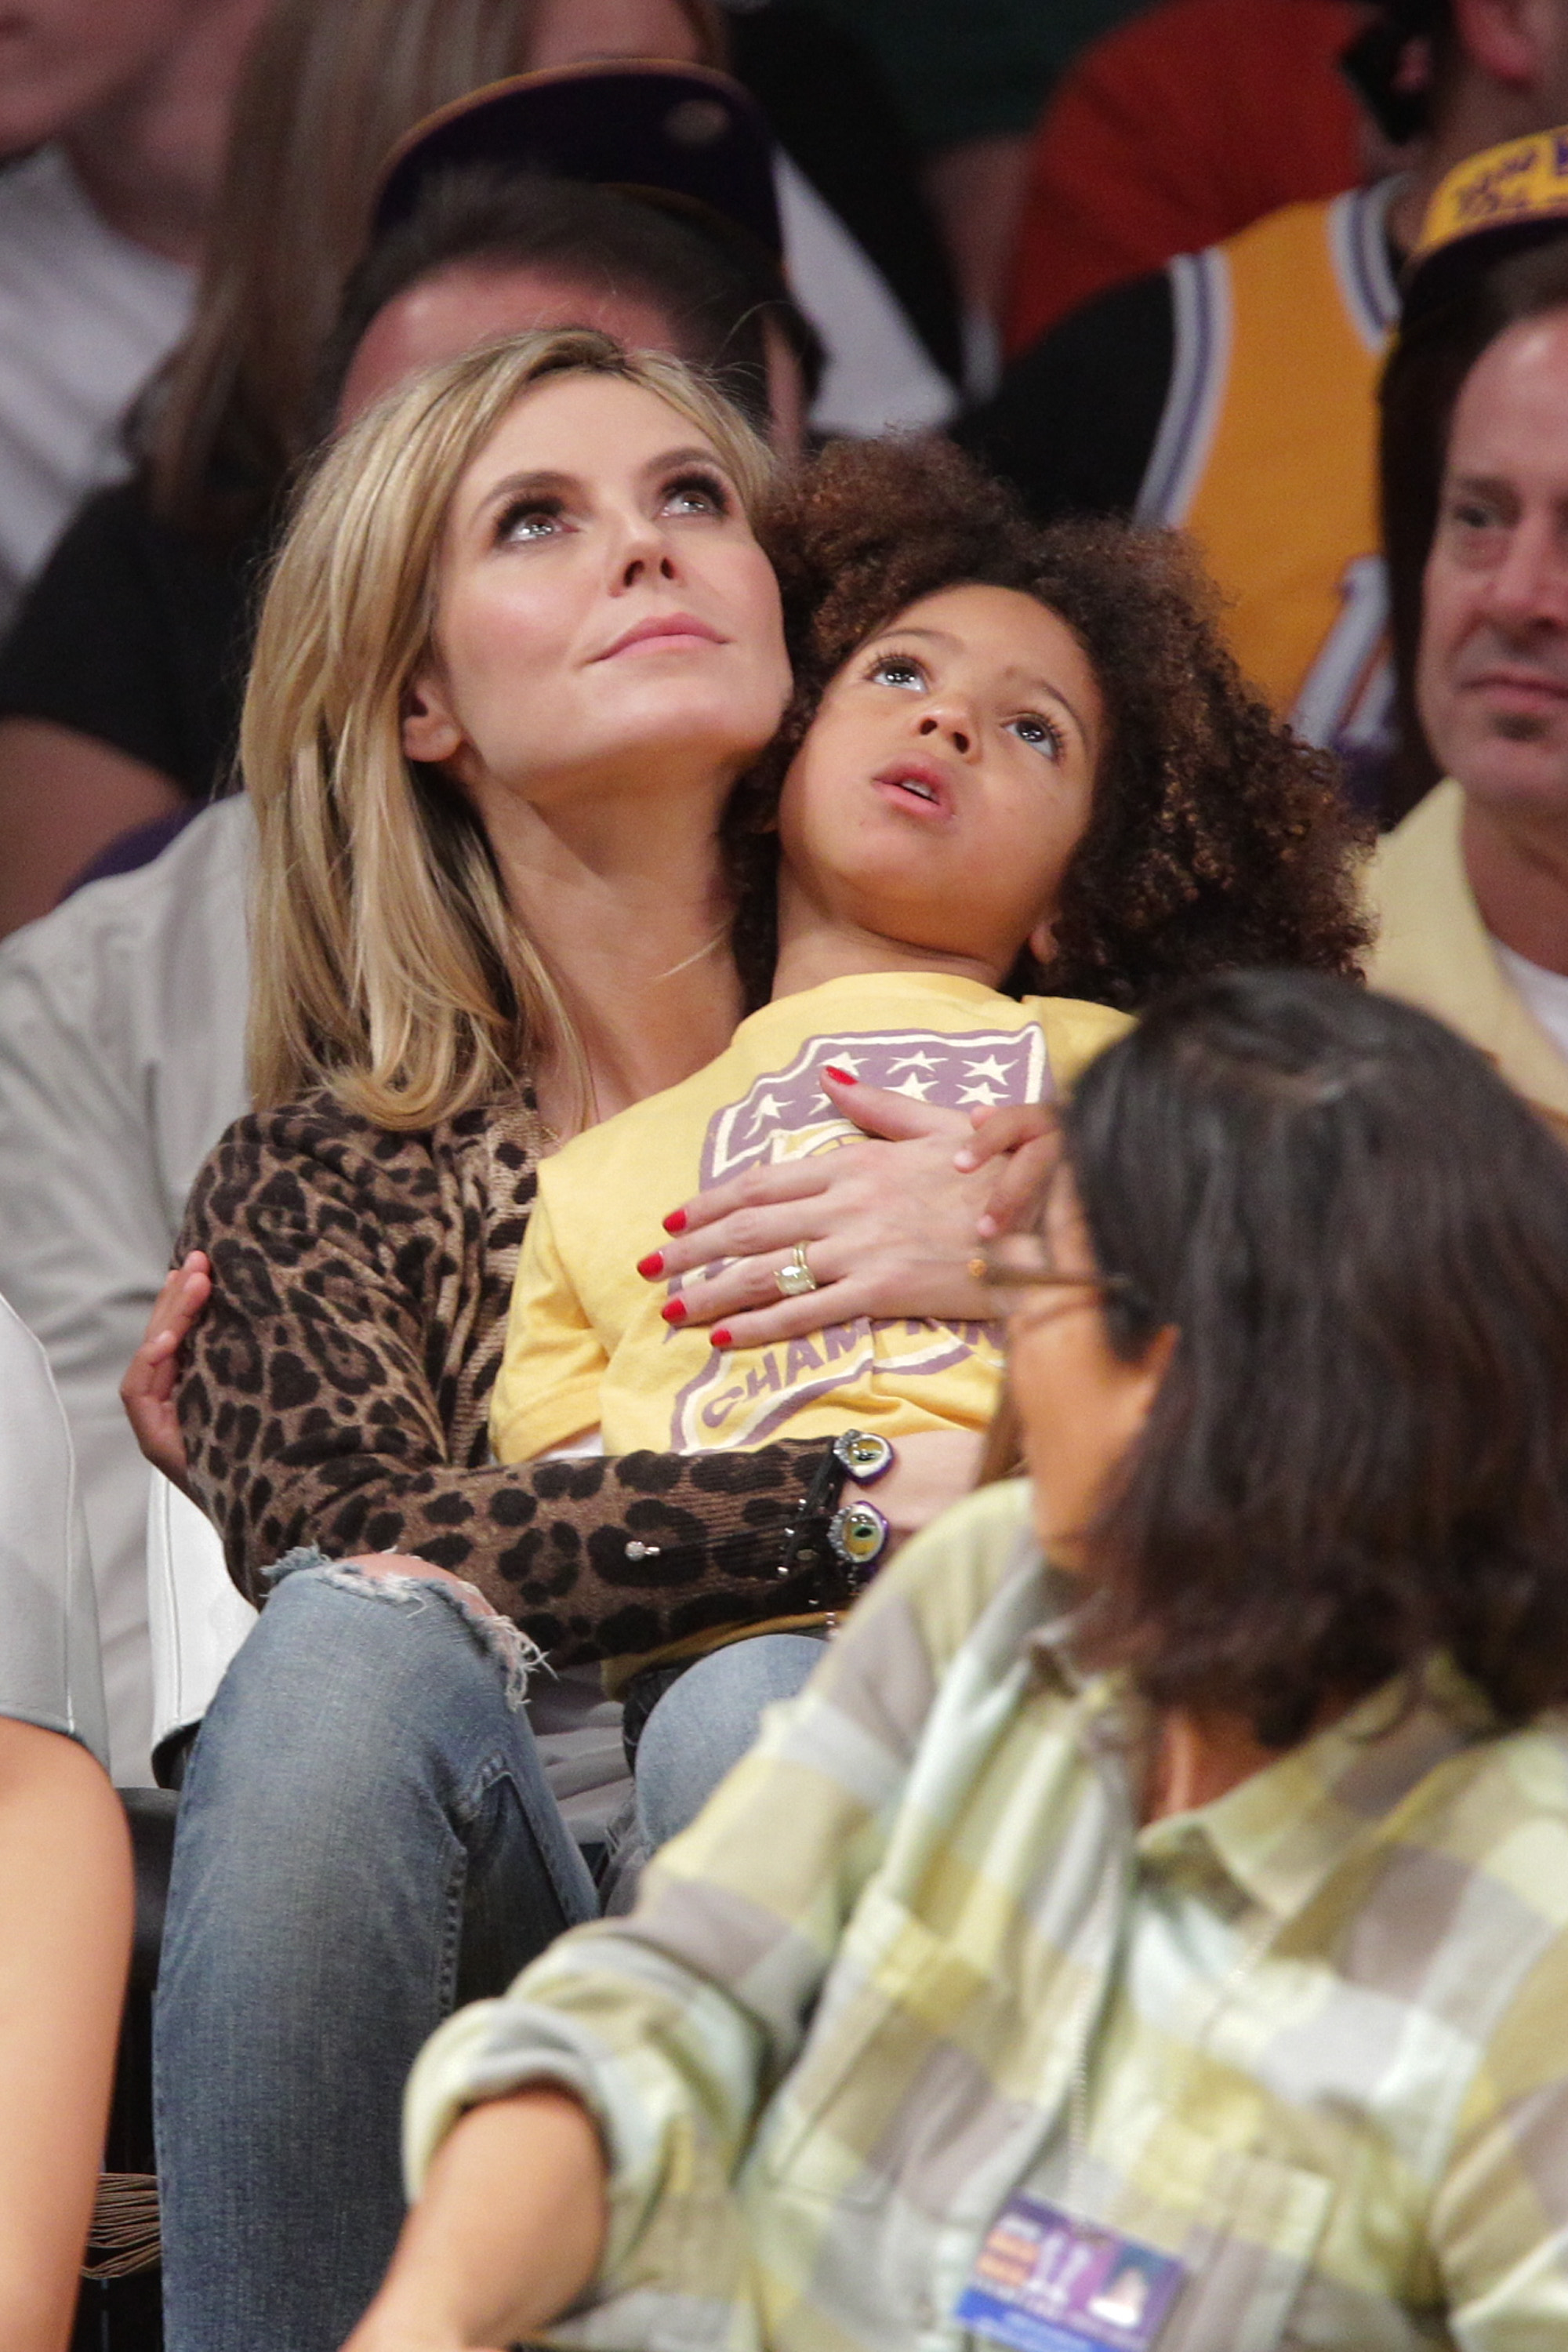 Heidi Klum and her son Johan Samuel at an NBA game on January 7, 2011, in Los Angeles, California. | Source: Getty Images